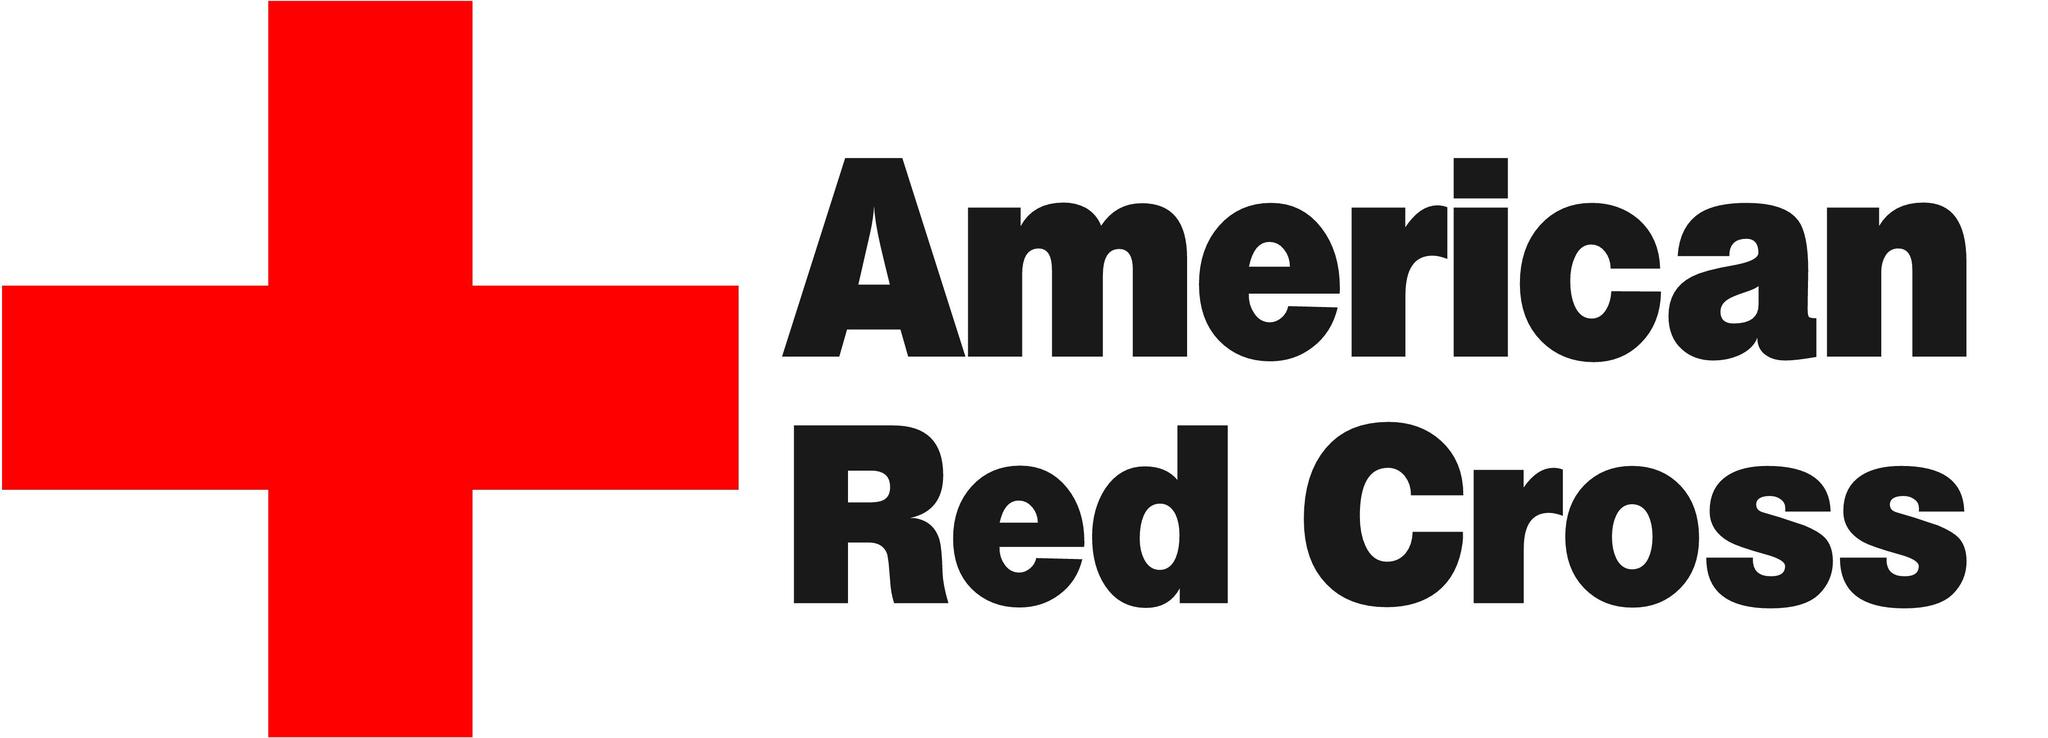 American Red Cross - Contributed art